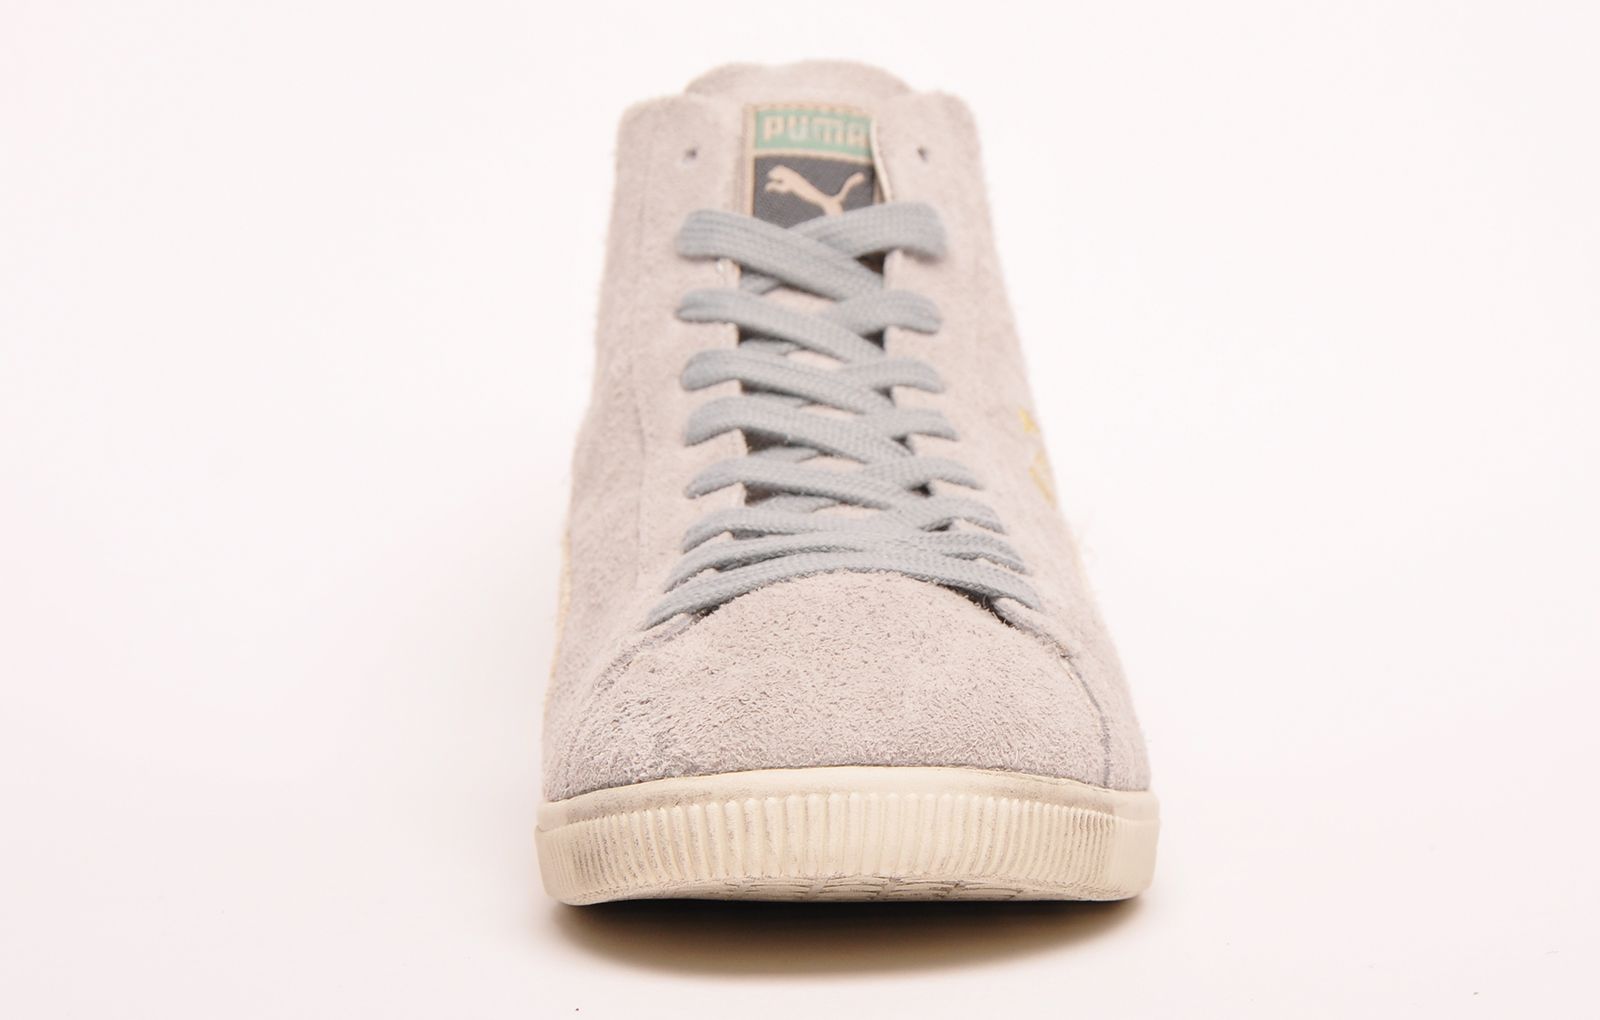 Puma Gylde Mid VTG Grey Trainers. Puma Gylde Mid VTG Grey Trainers. Style: 354392-04. Classic Puma Suede High Top Sneaker. Lace Fasten Trainers, Worn Frayed Thread Detail. Branding On Tongue, Back and Side